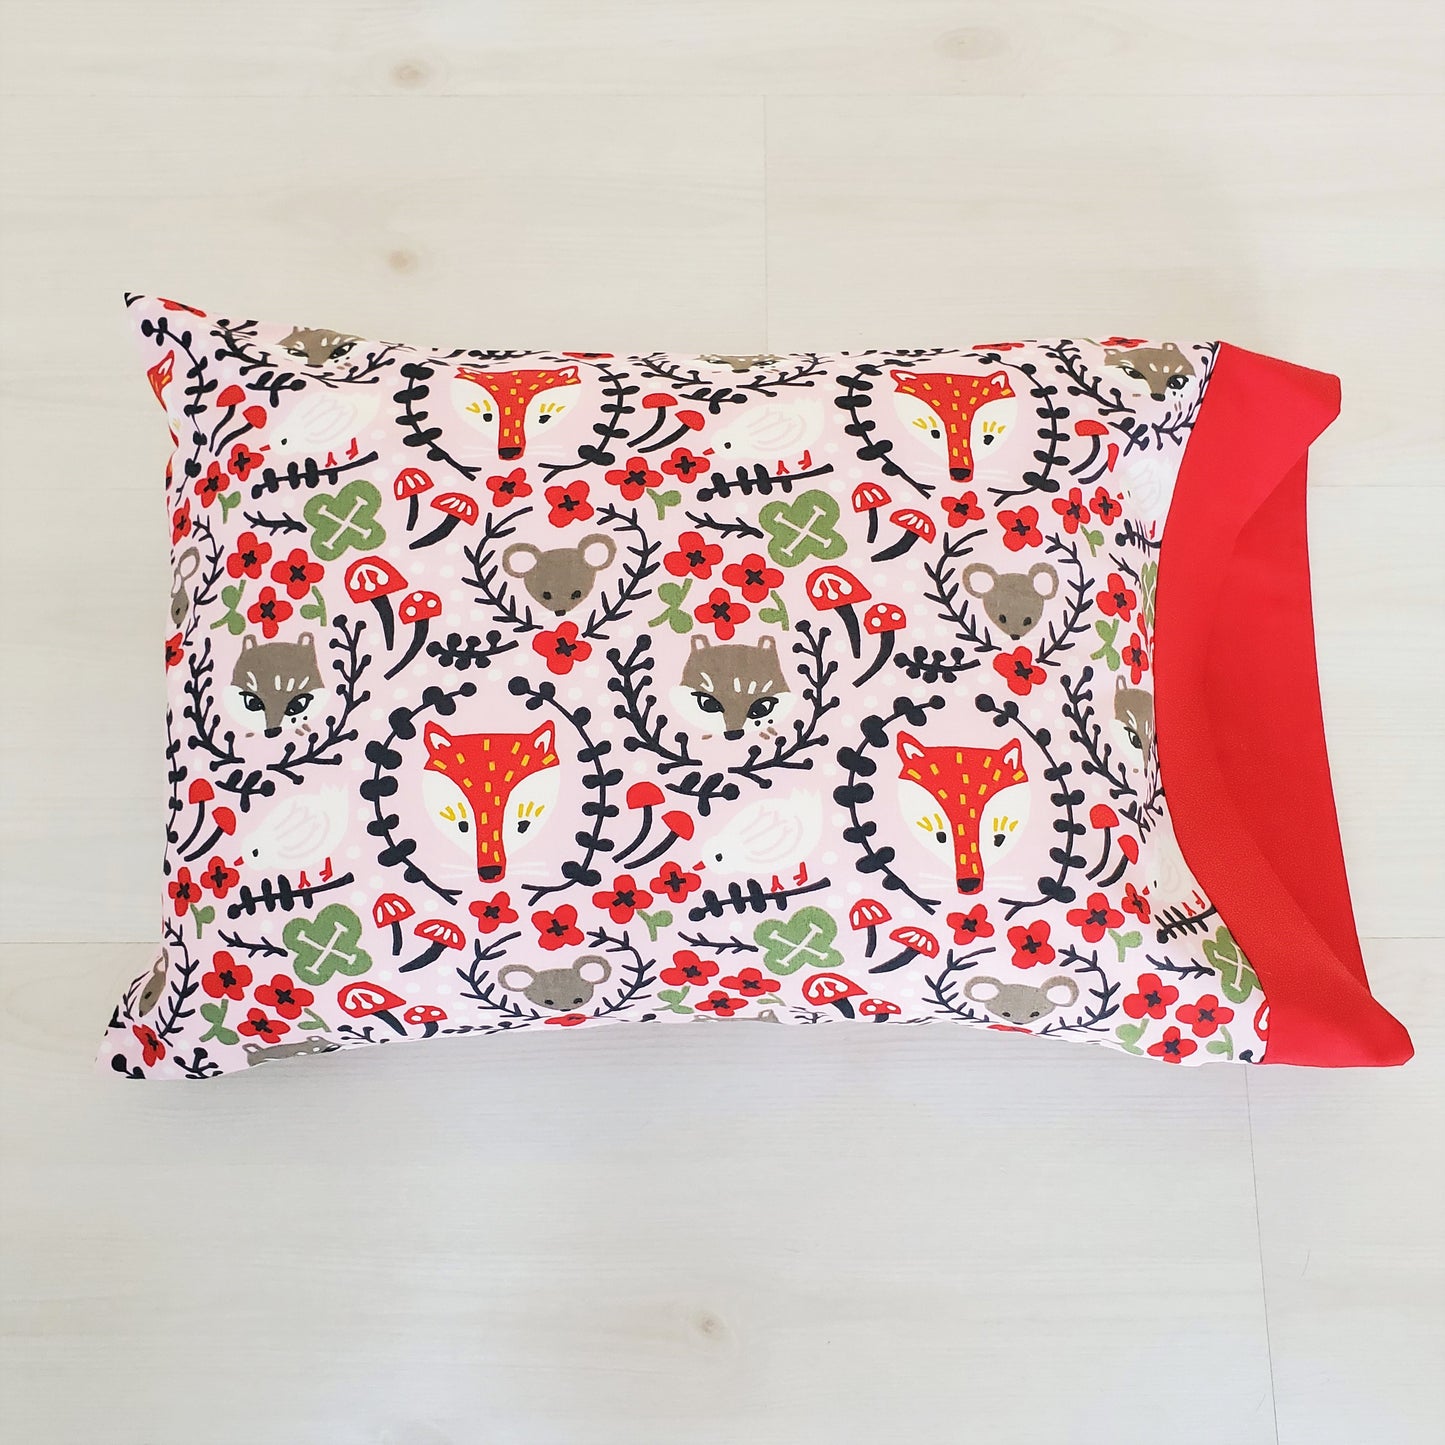 Foxes & Woodland Animal Pillowcases in Organic Cotton